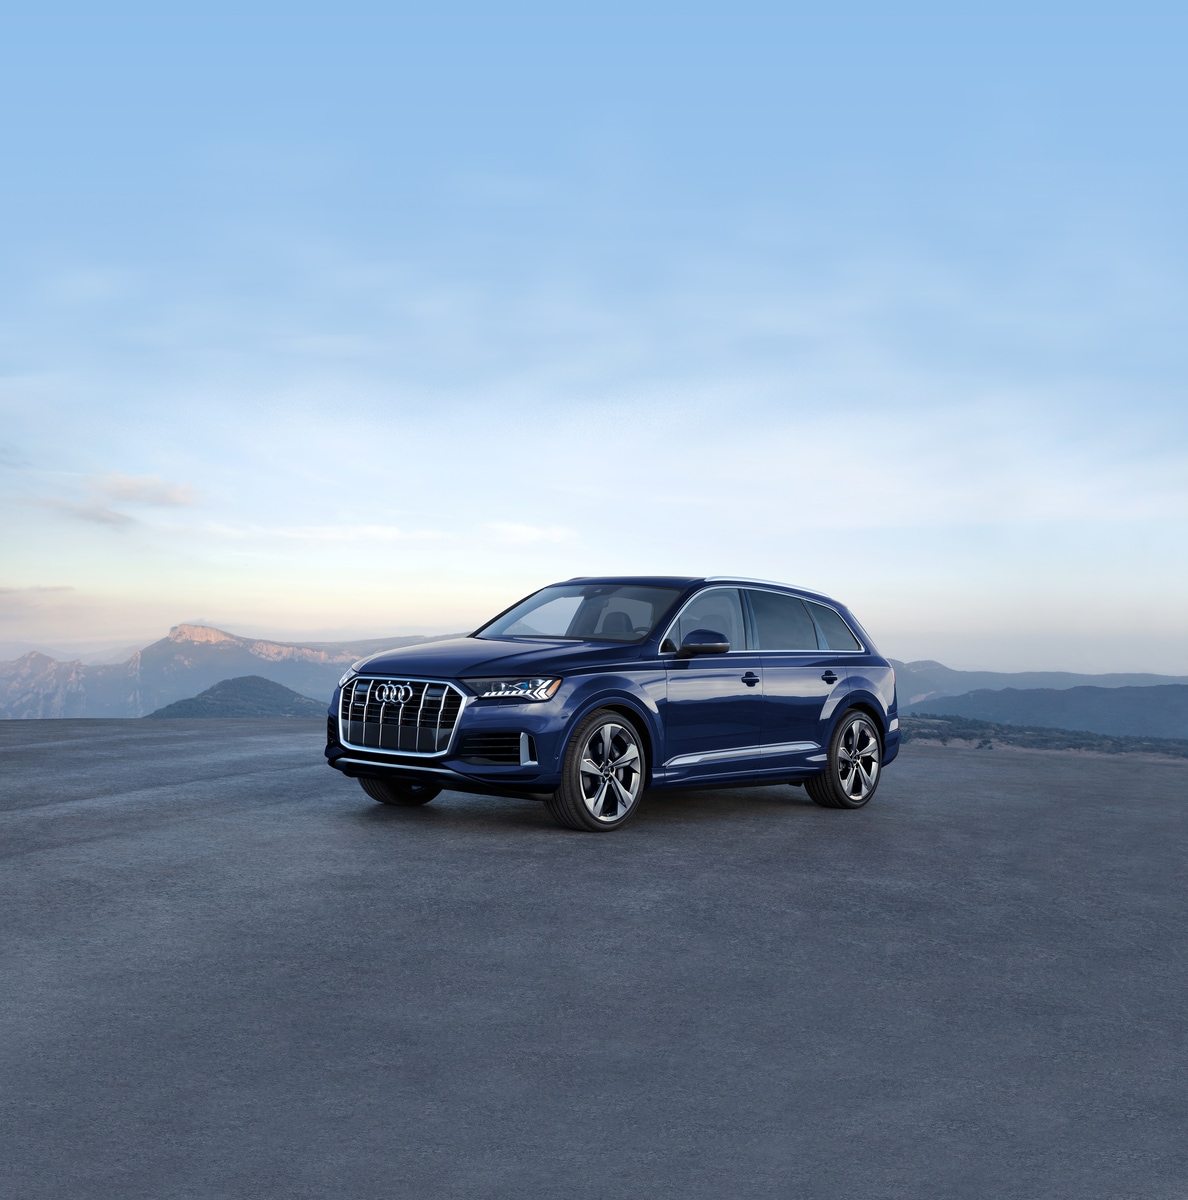 blue Audi Q7 SUV parked in a large open area